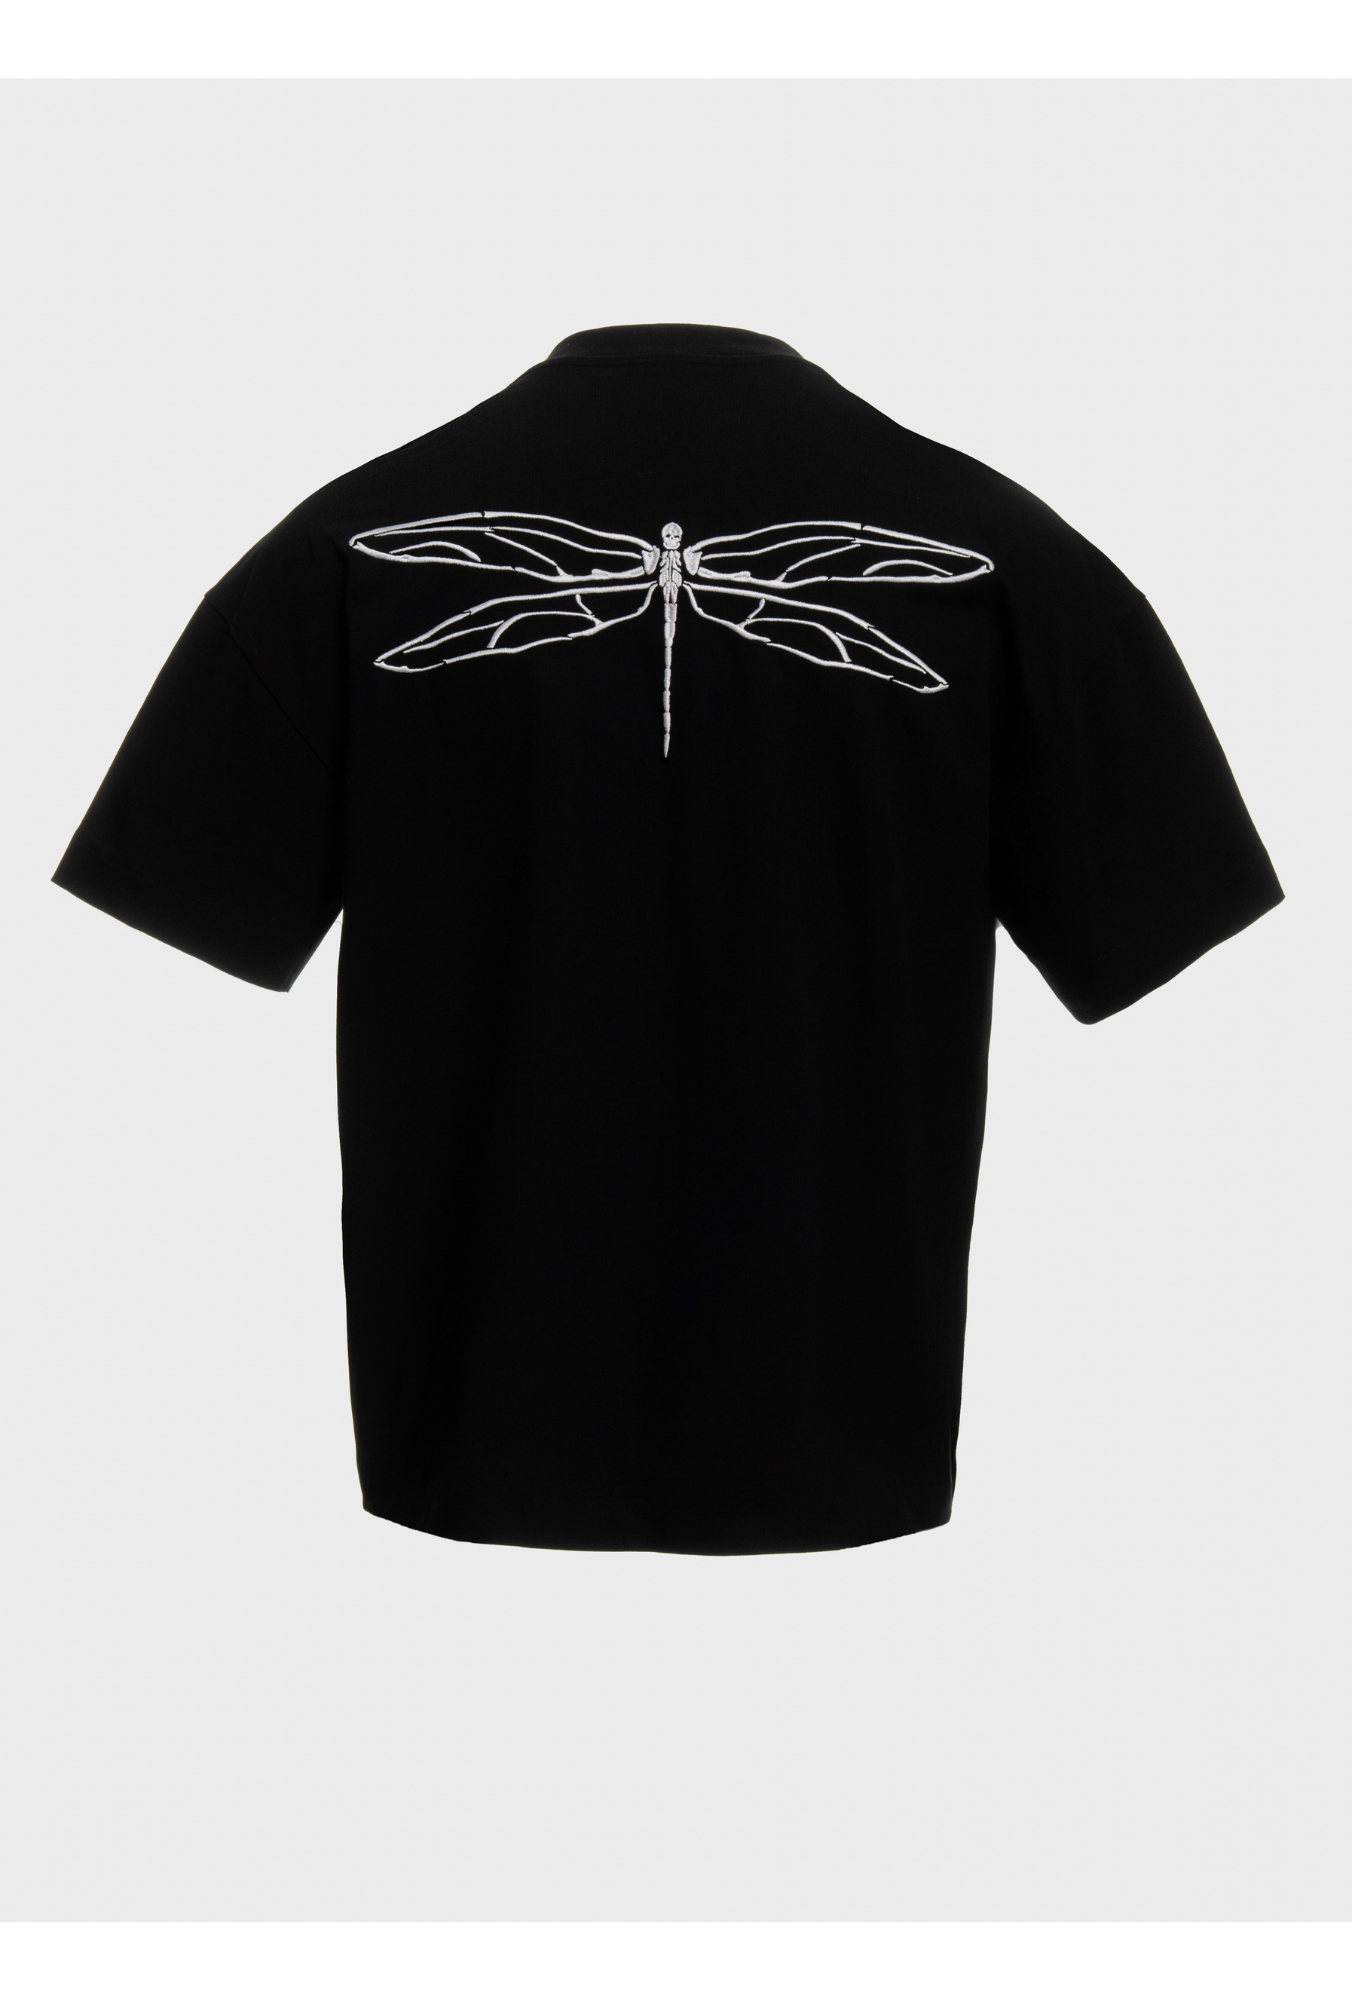 Dragonfly embrodery front and back